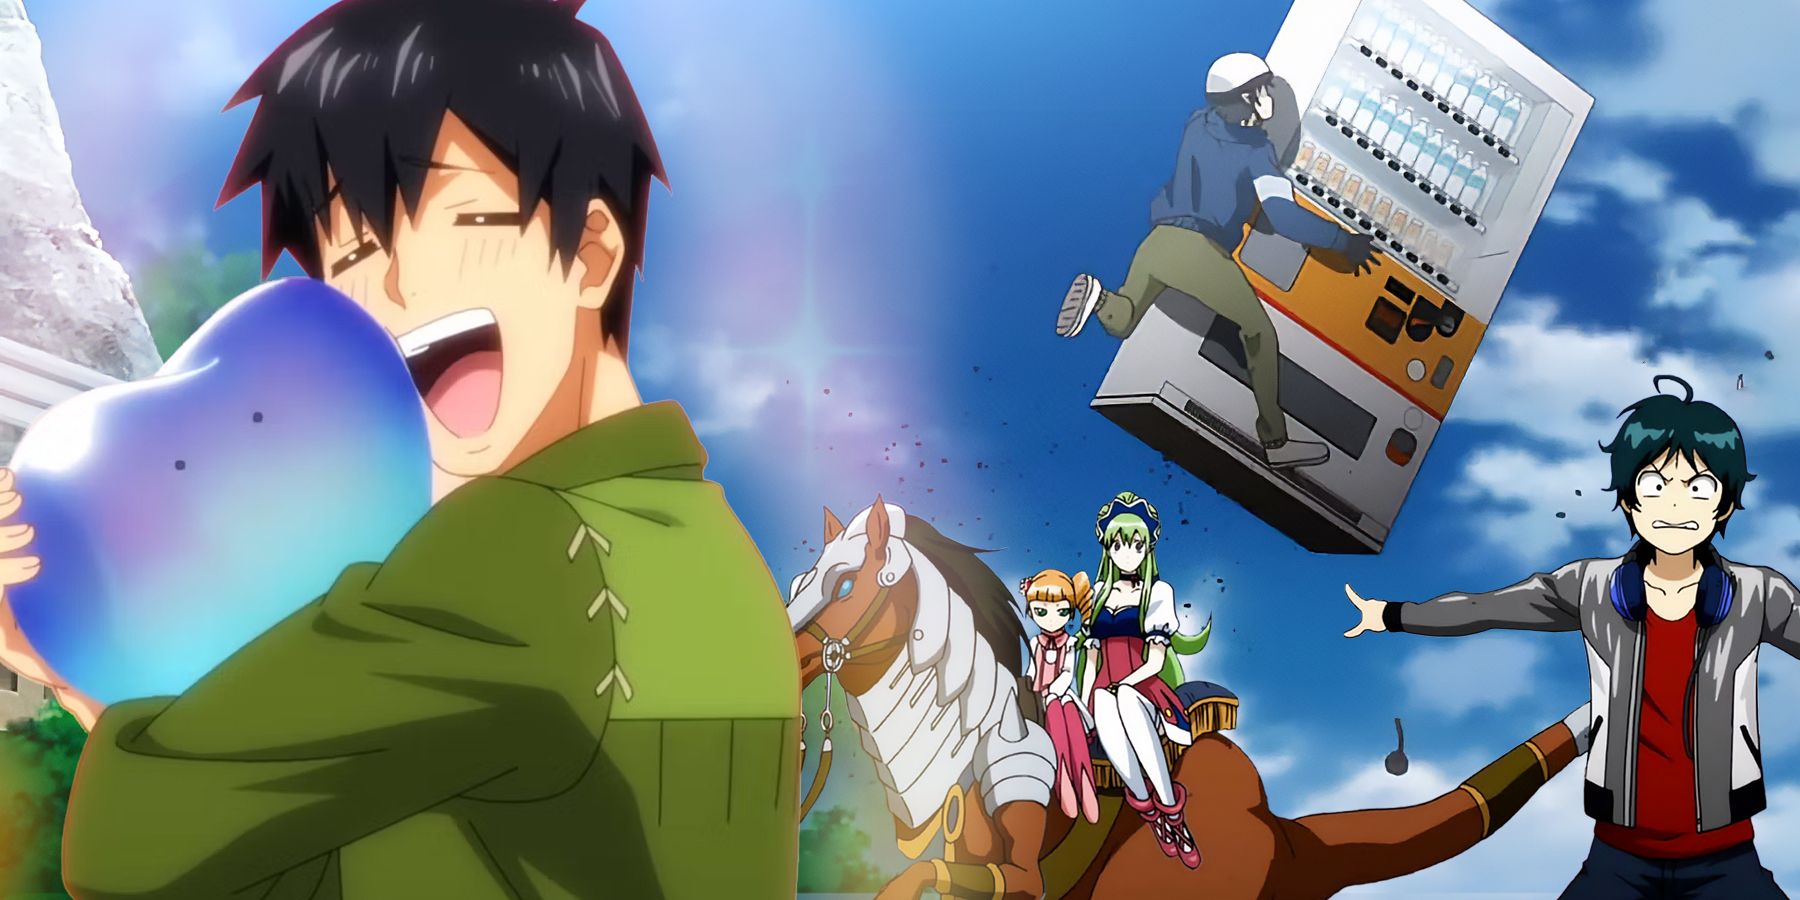 The 15 Weirdest Isekai Anime Plots You Can't Help But Laugh At